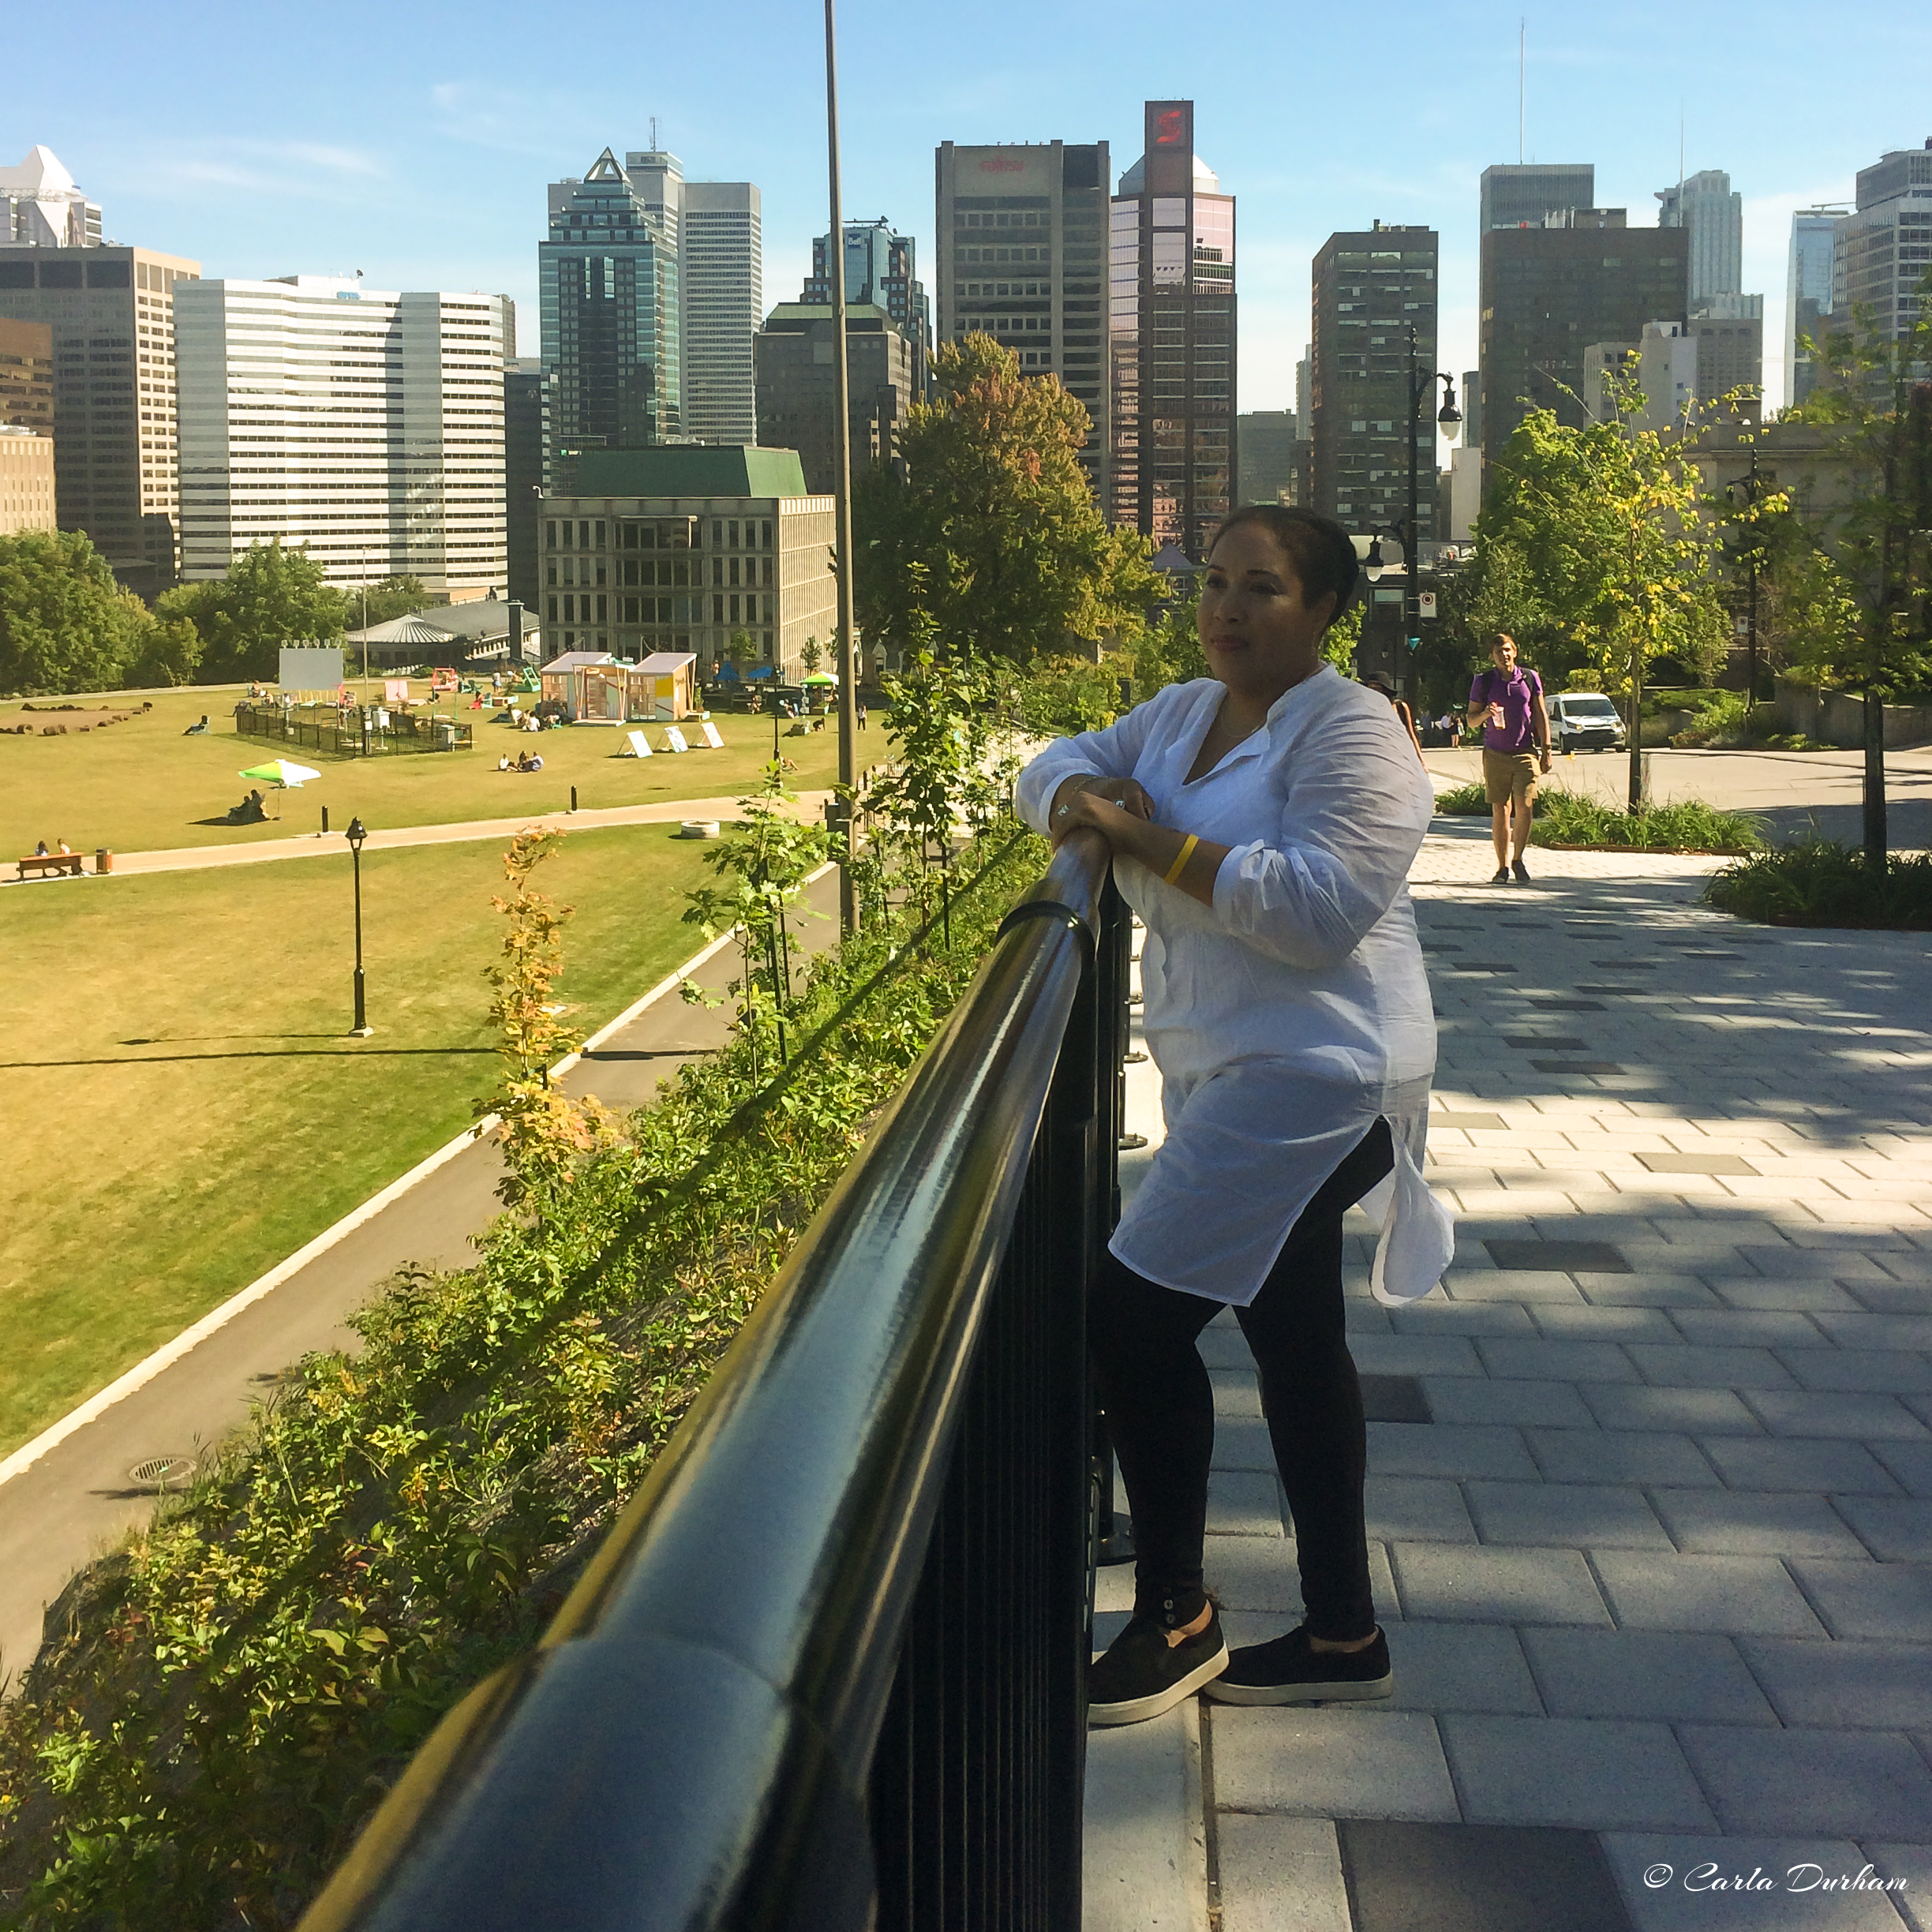 Carla Durham in Montreal, Canada with the skyline in the background